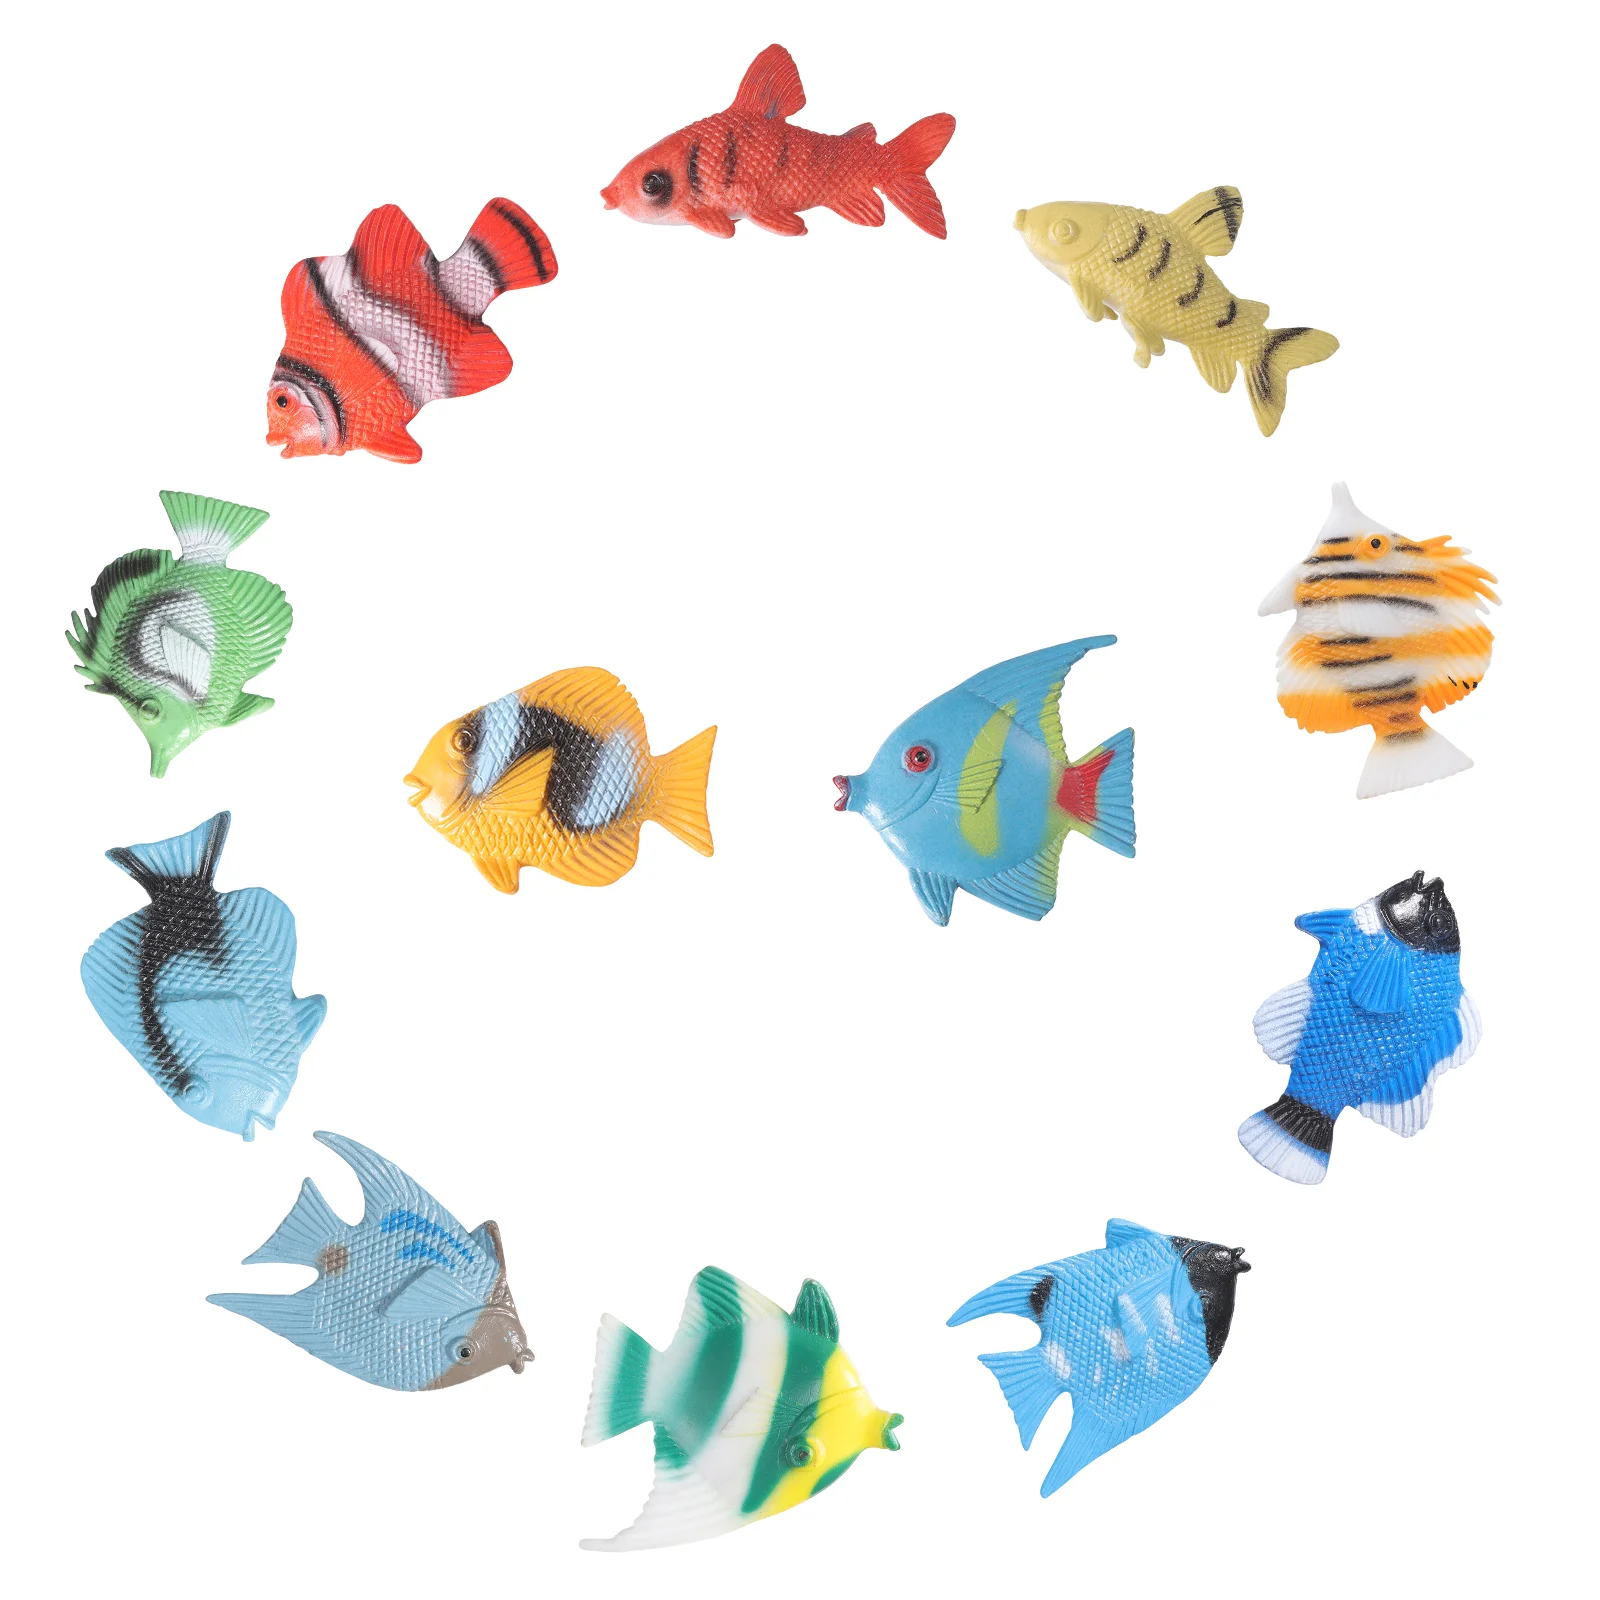 

Zerodeko Tropical Fish Toys Pastic Sea Creatures Figurines Set Educational Learning Ocean Animal Figures Themed Party